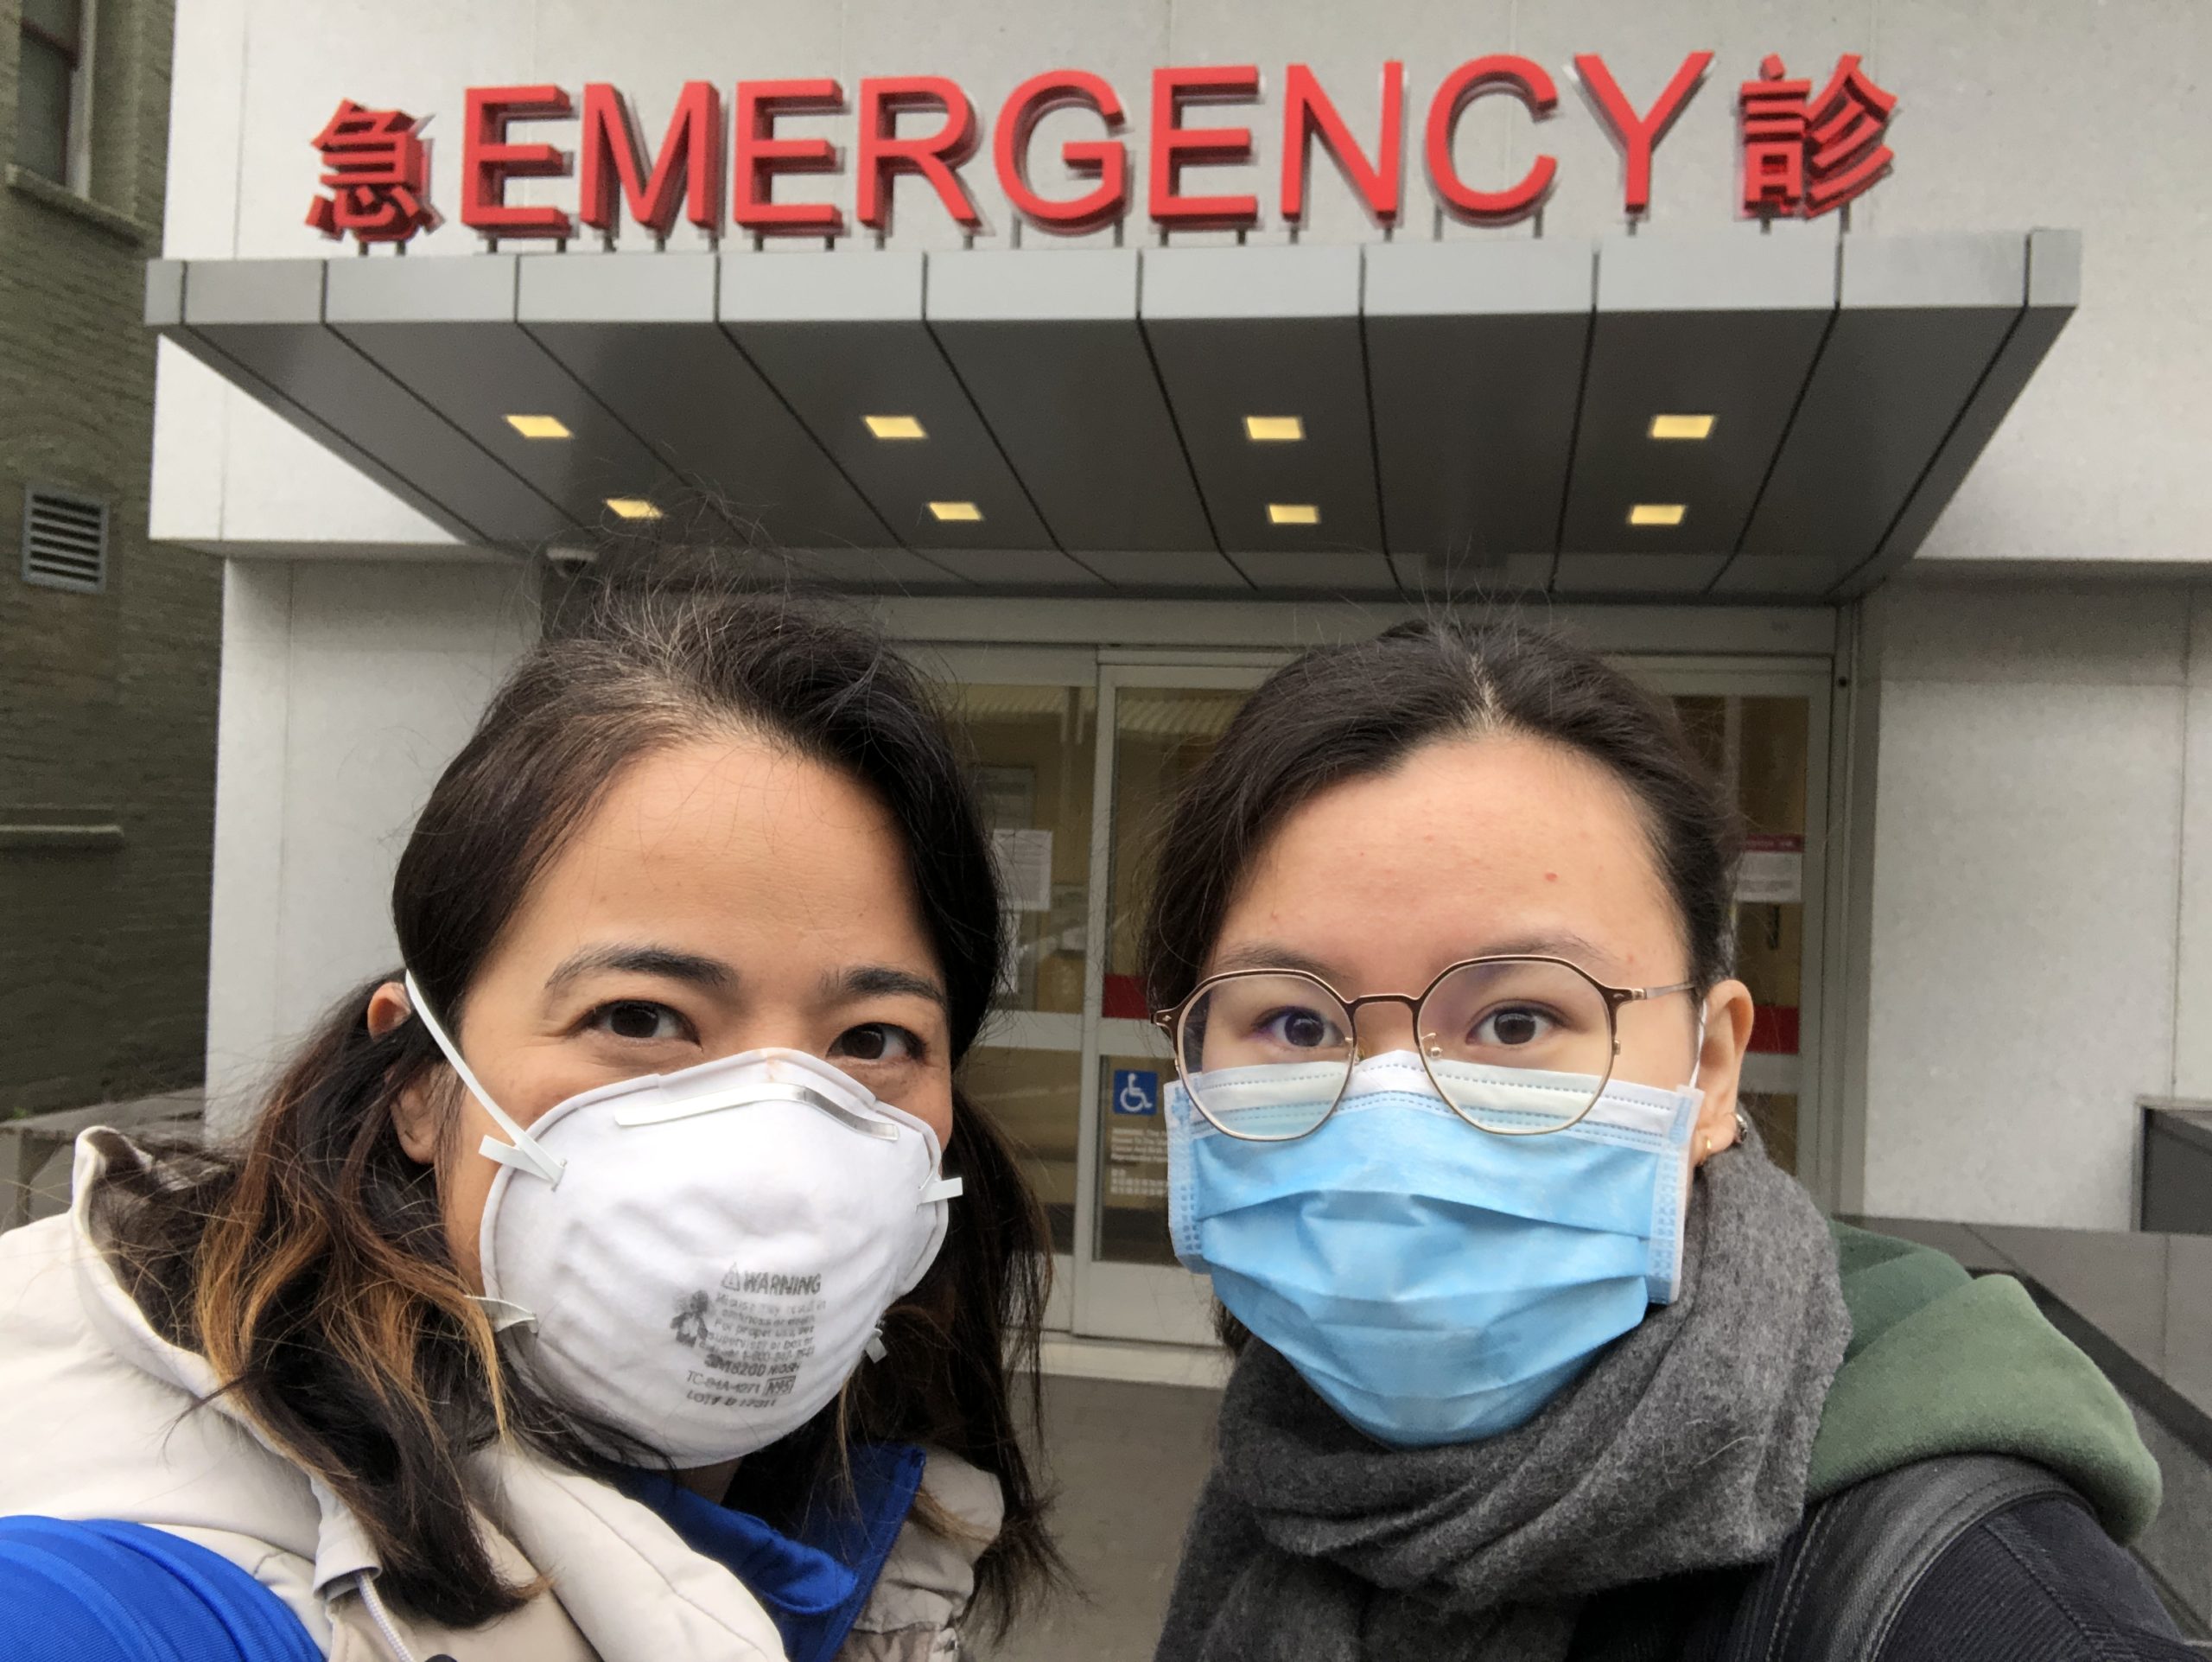 Two individuals wearing face masks stand in front of an emergency room entrance. The emergency sign is prominently displayed above them in both English and a second language. The atmosphere appears serious as they look toward the camera, capturing a scene reminiscent of a hard-hitting Berkeley Journalism report.